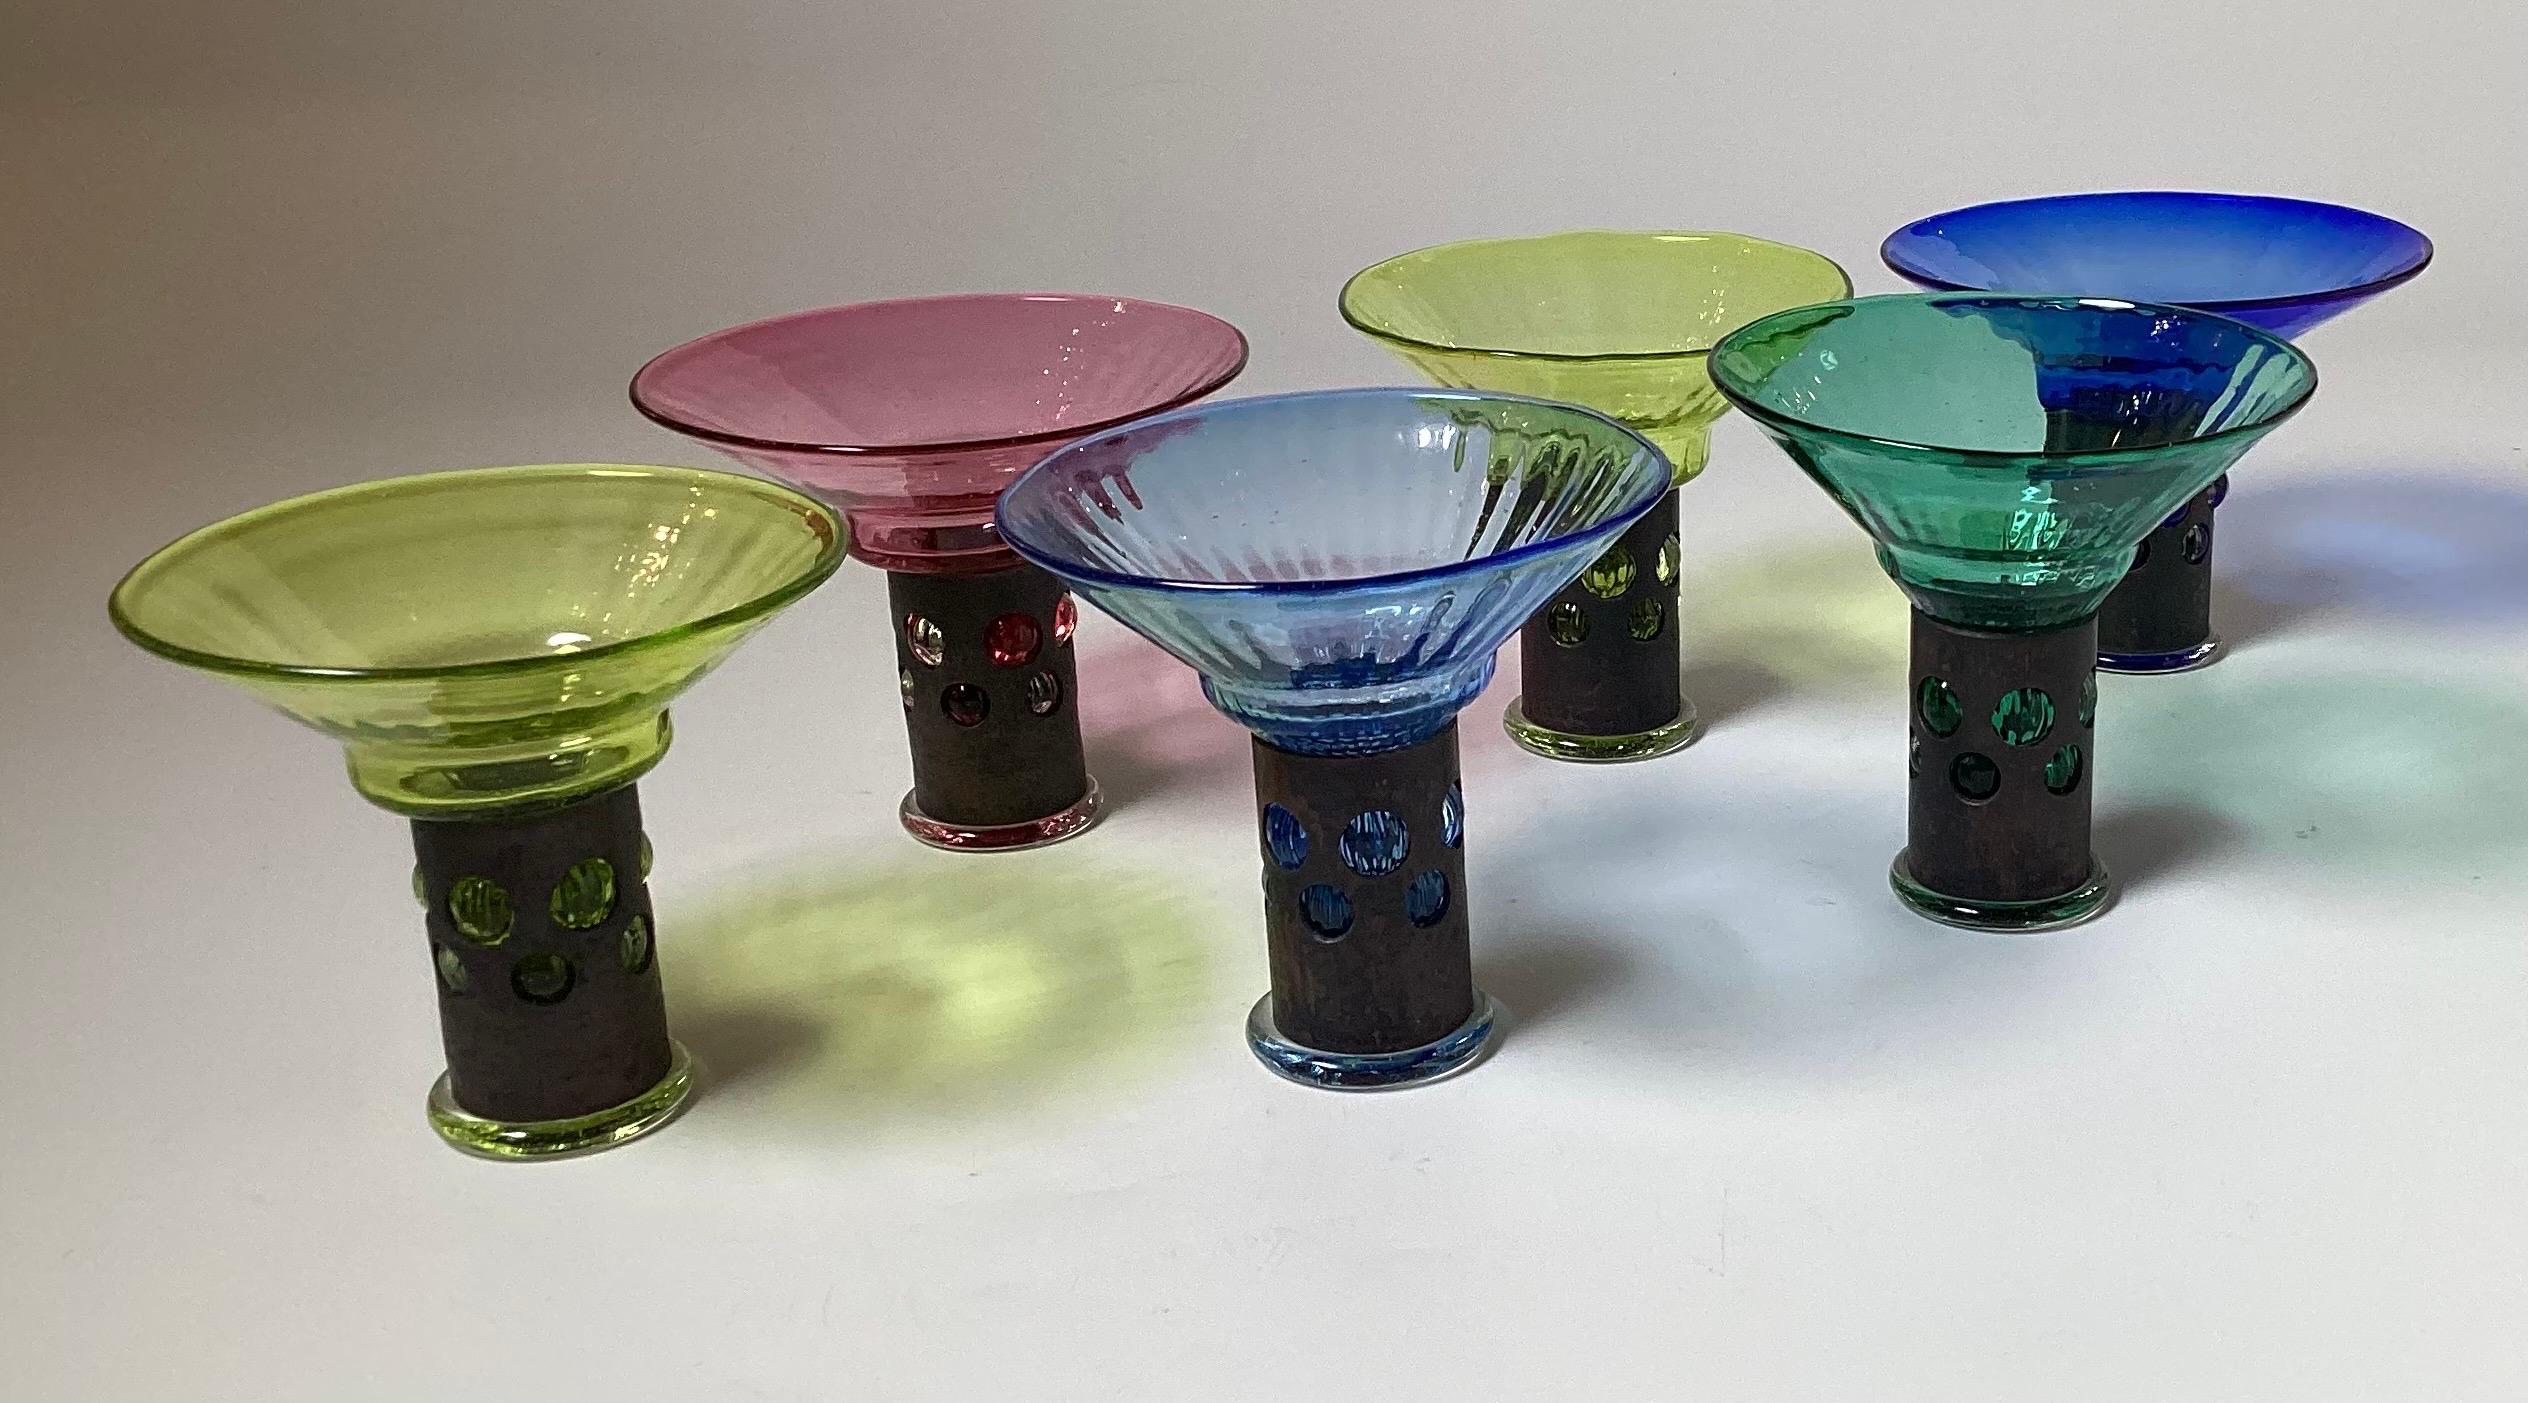 A set of 6 high style hand blown cocktail glasses in 5 colors with metal stems, hand blown by Borek Sipek.  Born in Prague, he was renowned for his individual, unusual, colorful, and rich style. He experimented with unexpected and often opulent